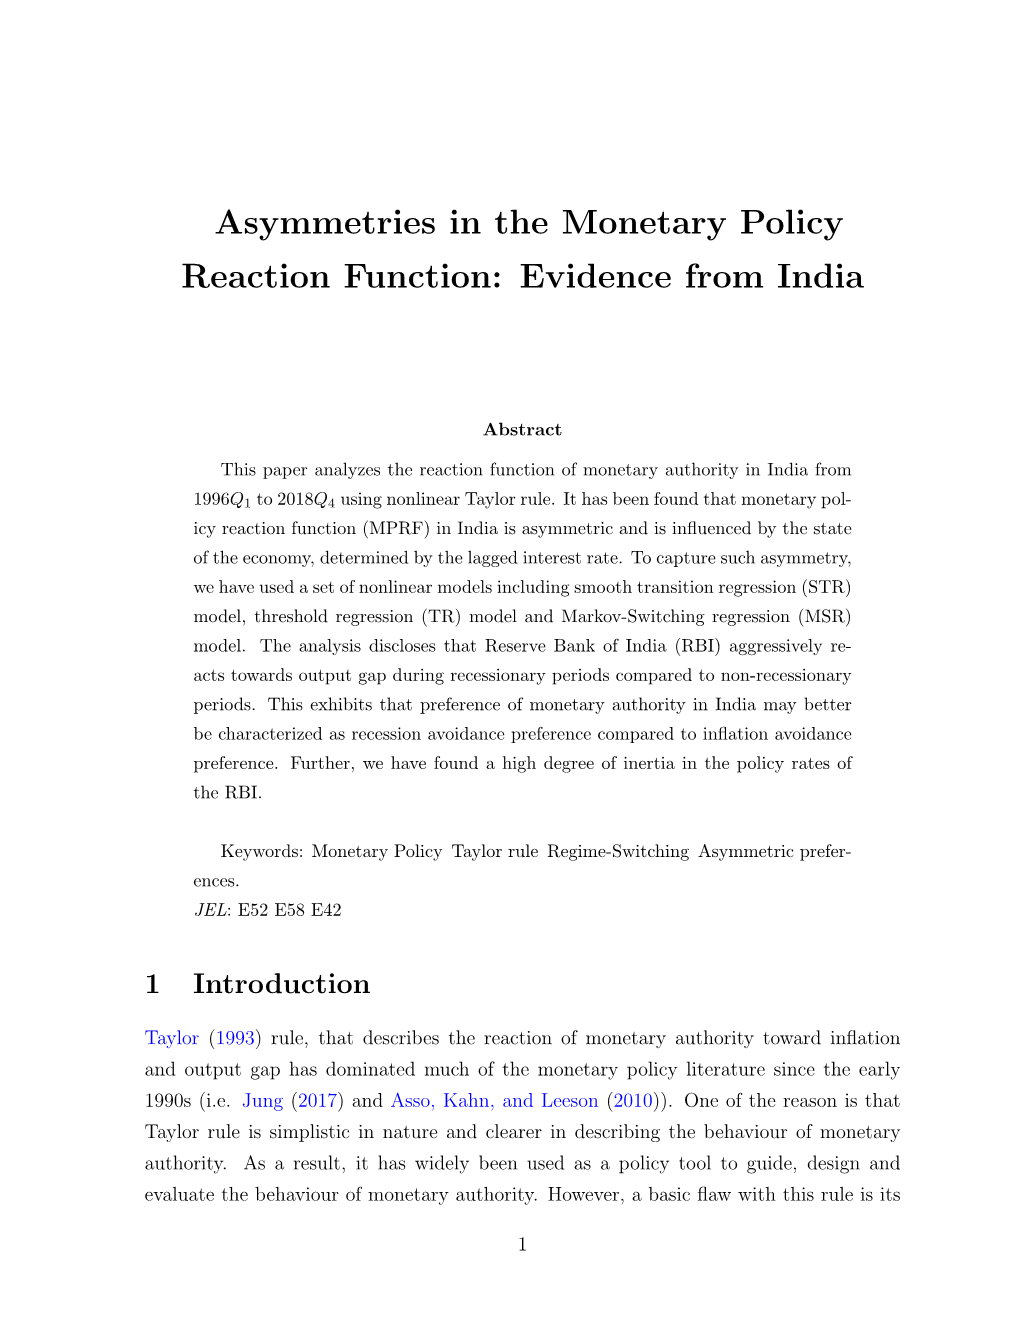 Asymmetries in the Monetary Policy Reaction Function: Evidence from India